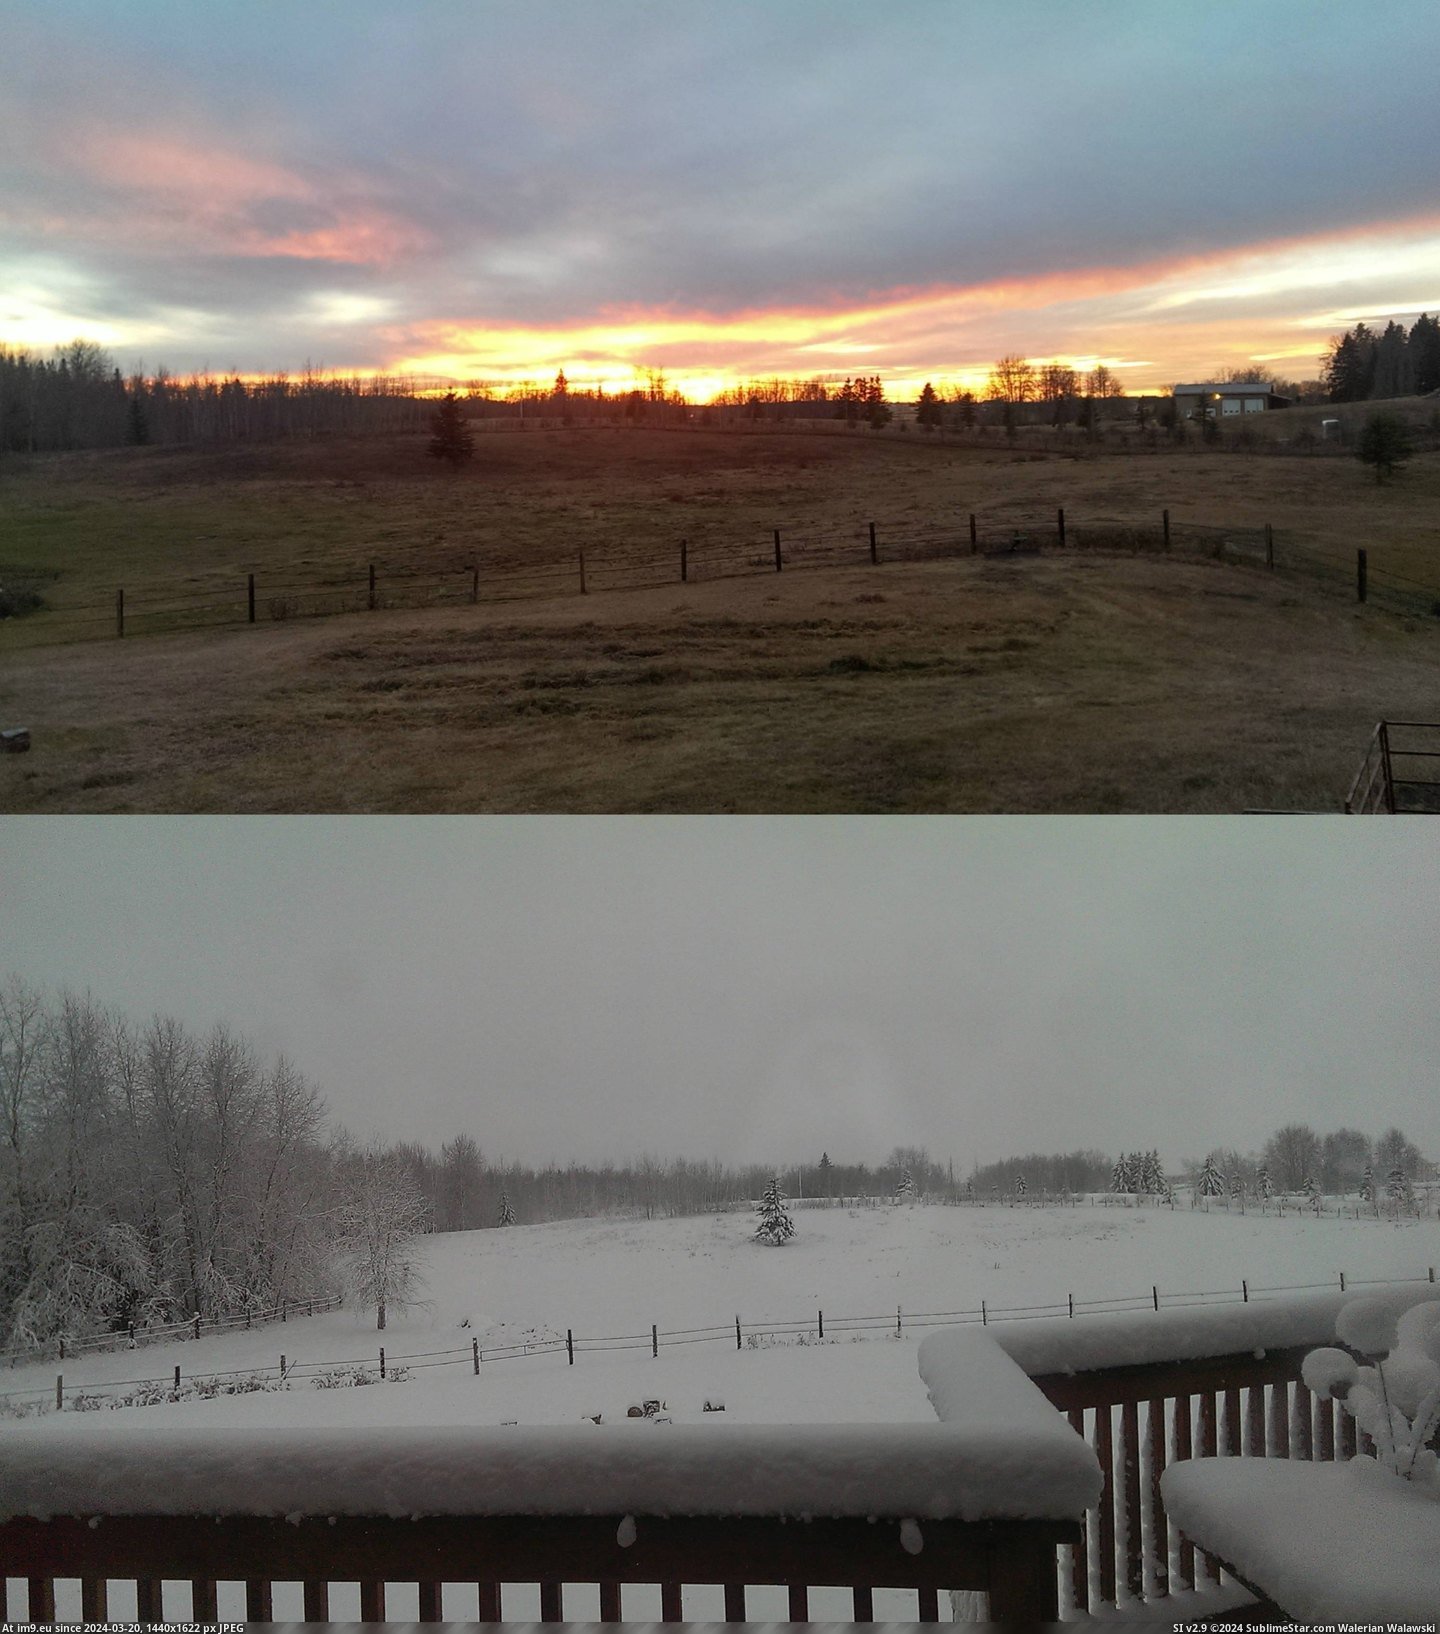 #How #Canada #Yard #Alberta #Changed #Live #Hours [Pics] I live in Alberta Canada, this is how my yard changed within 24 hours. Pic. (Изображение из альбом My r/PICS favs))